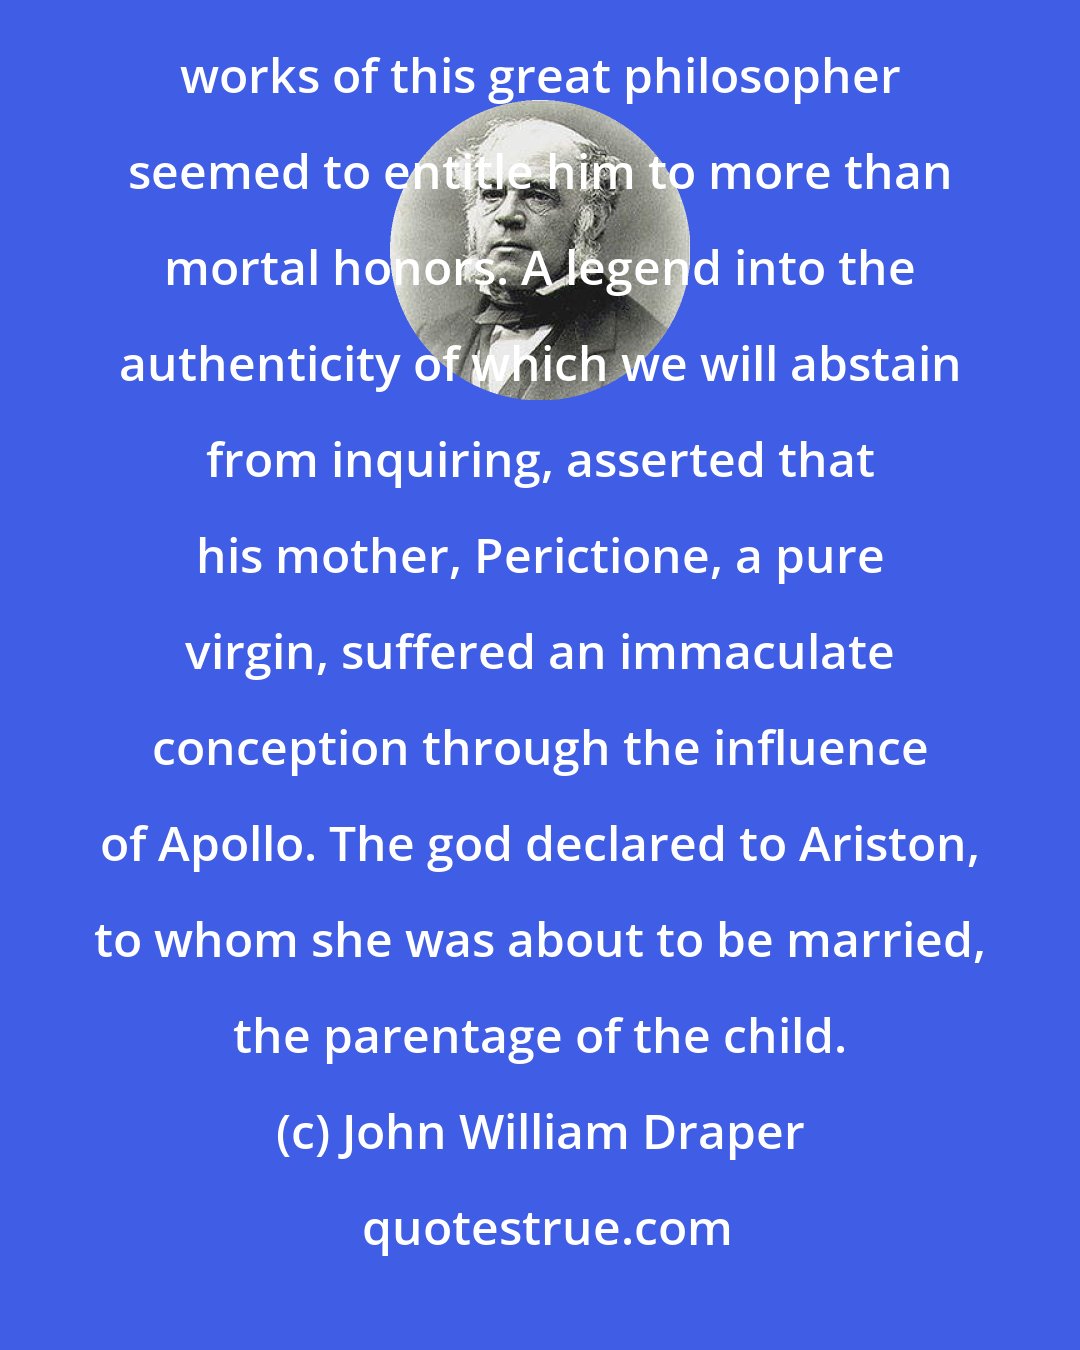 John William Draper: Antiquity was often delighted to cast a halo of mythical glory around its illustrious names. The immortal works of this great philosopher seemed to entitle him to more than mortal honors. A legend into the authenticity of which we will abstain from inquiring, asserted that his mother, Perictione, a pure virgin, suffered an immaculate conception through the influence of Apollo. The god declared to Ariston, to whom she was about to be married, the parentage of the child.